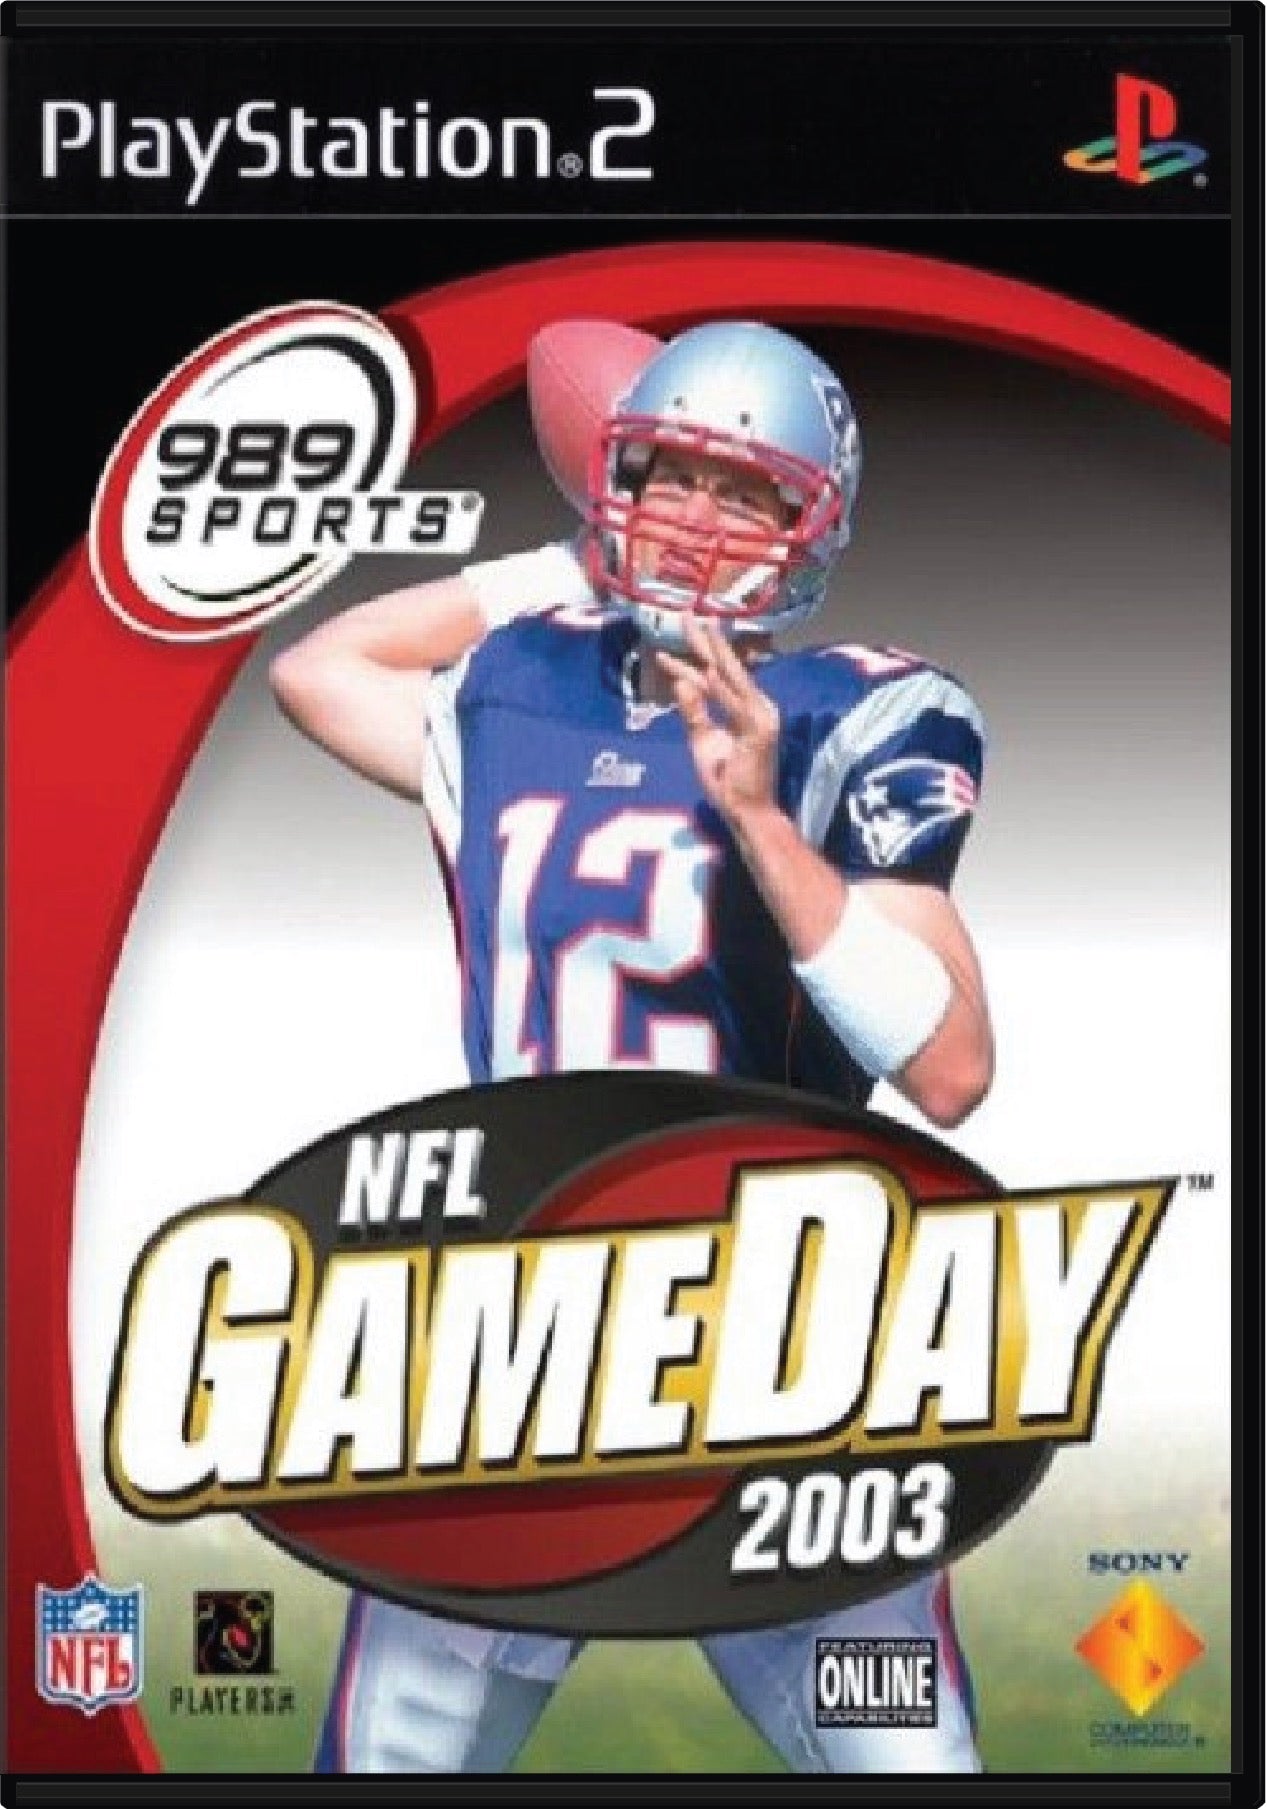 NFL Gameday 2003 Cover Art and Product Photo